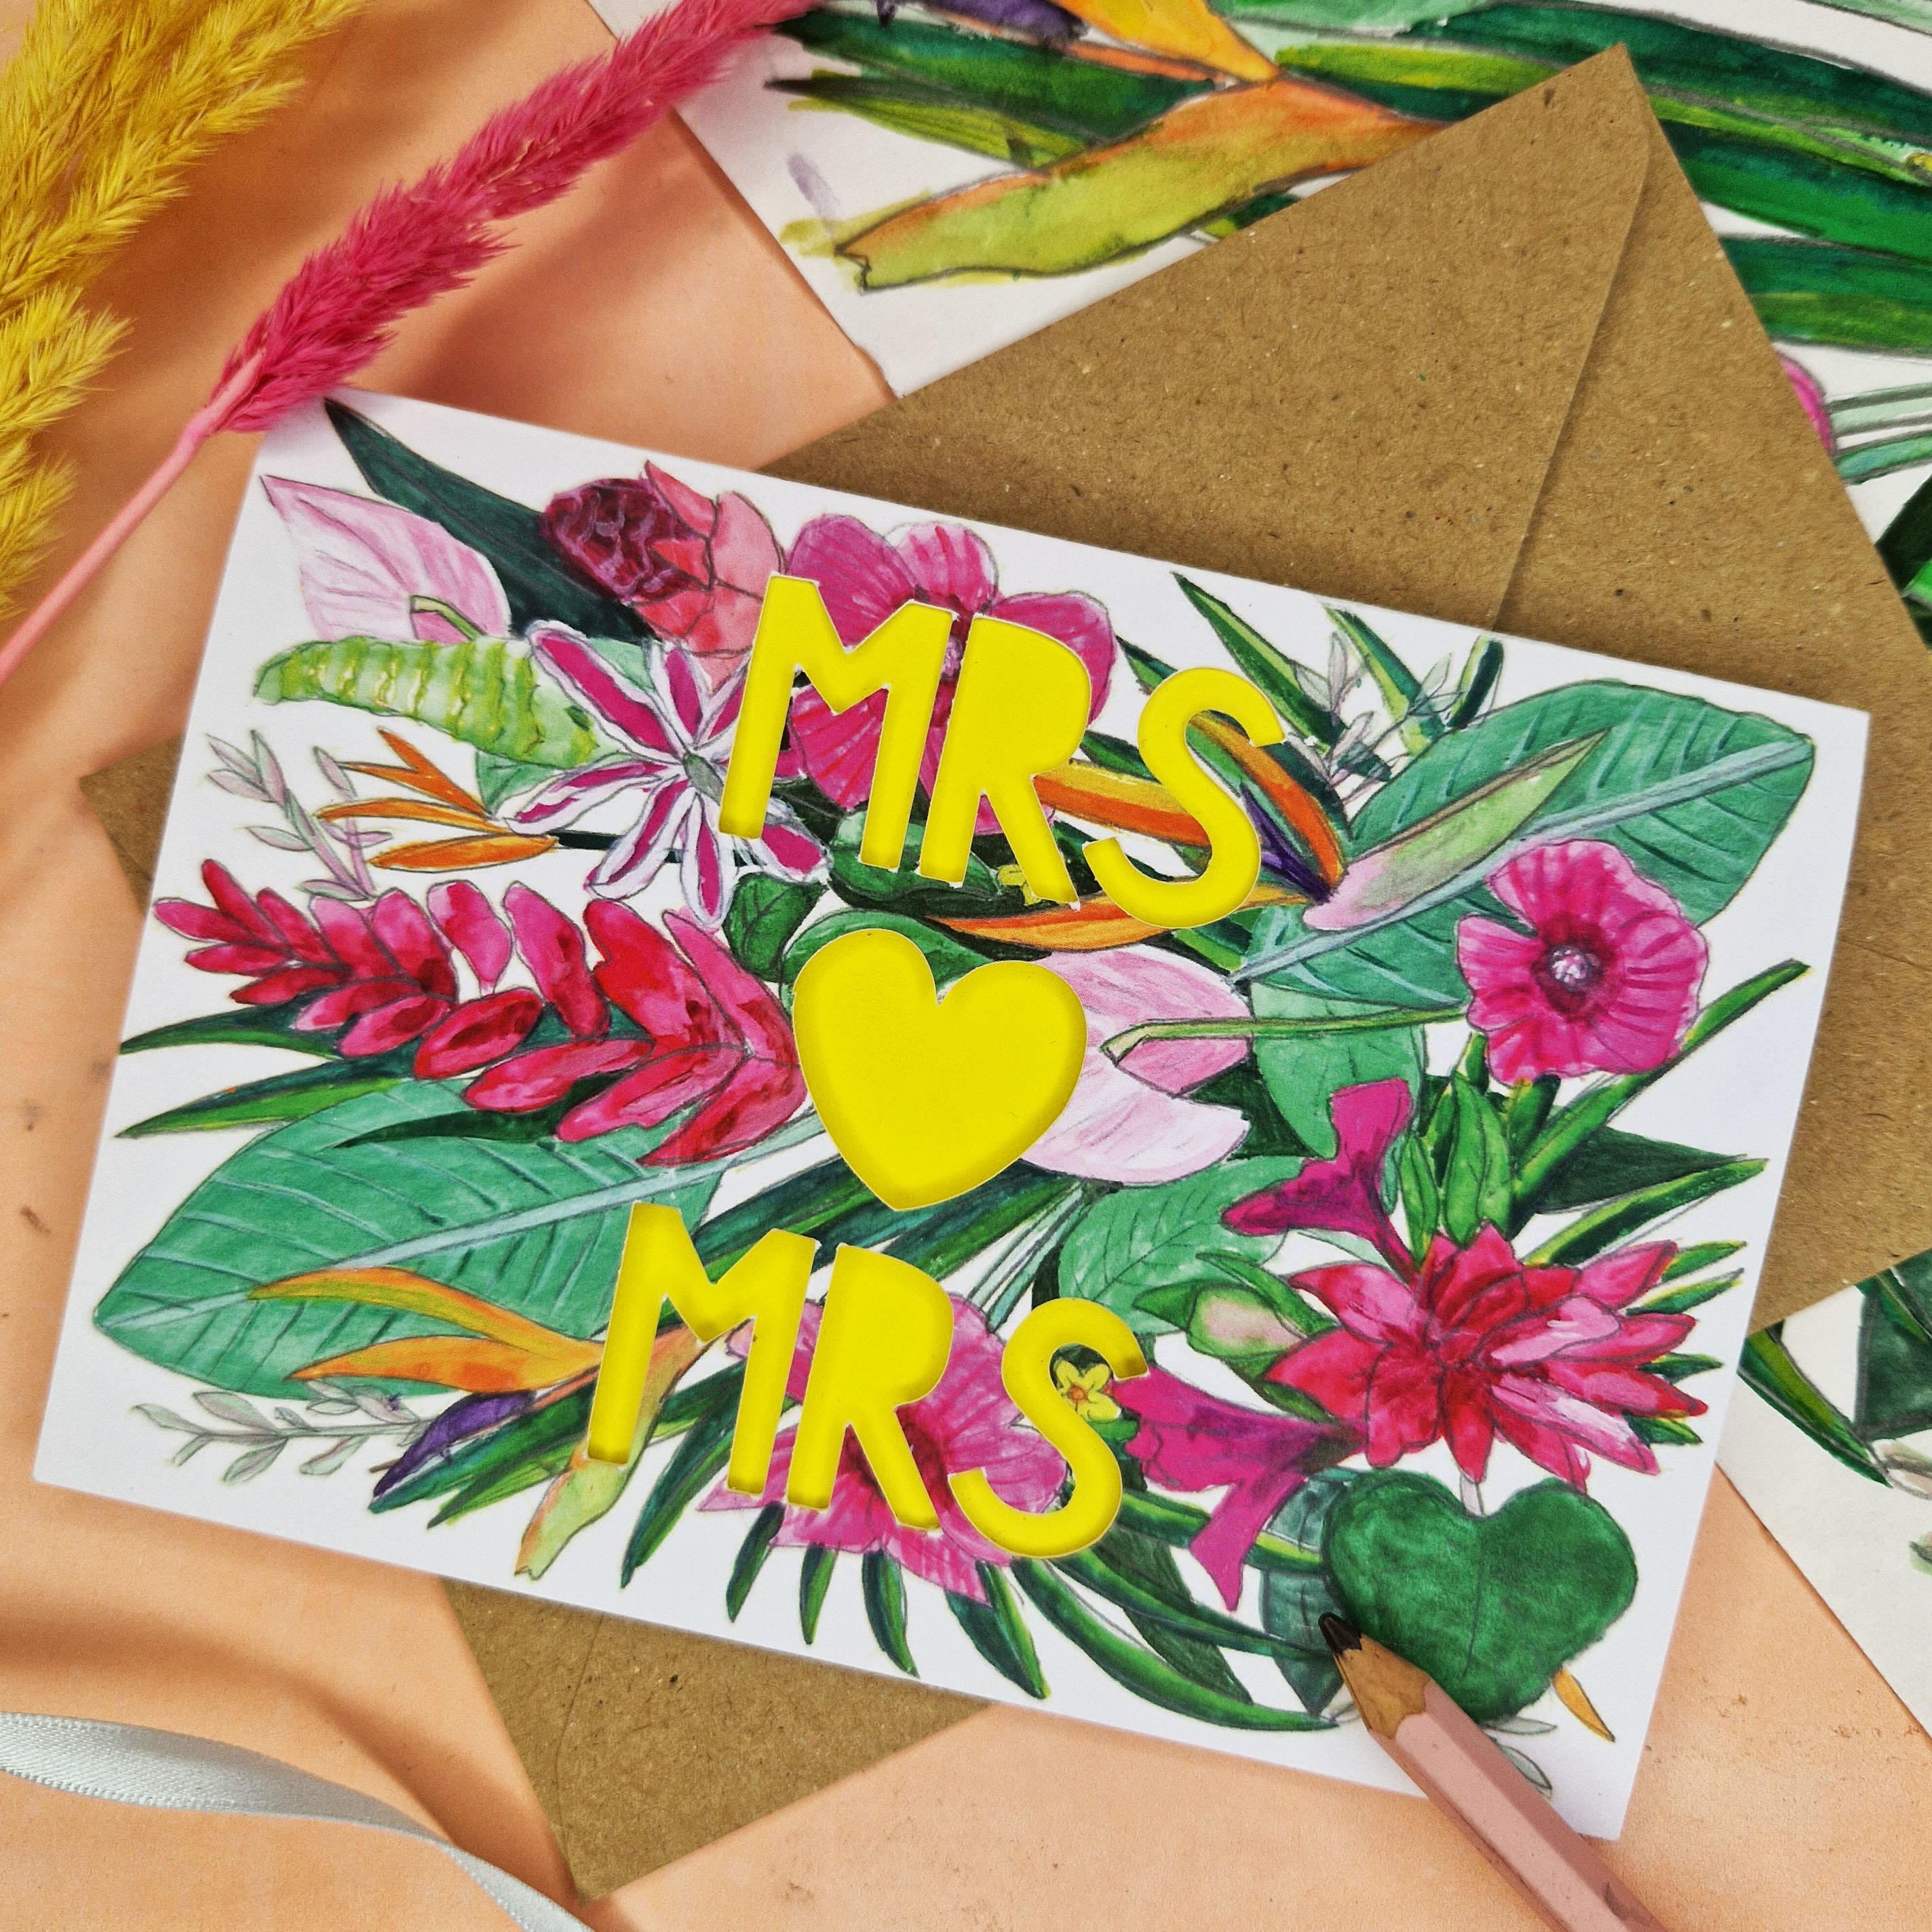 Flat lay of Floral Card with Paper cut text that says Mrs and Mrs with bright floral background.